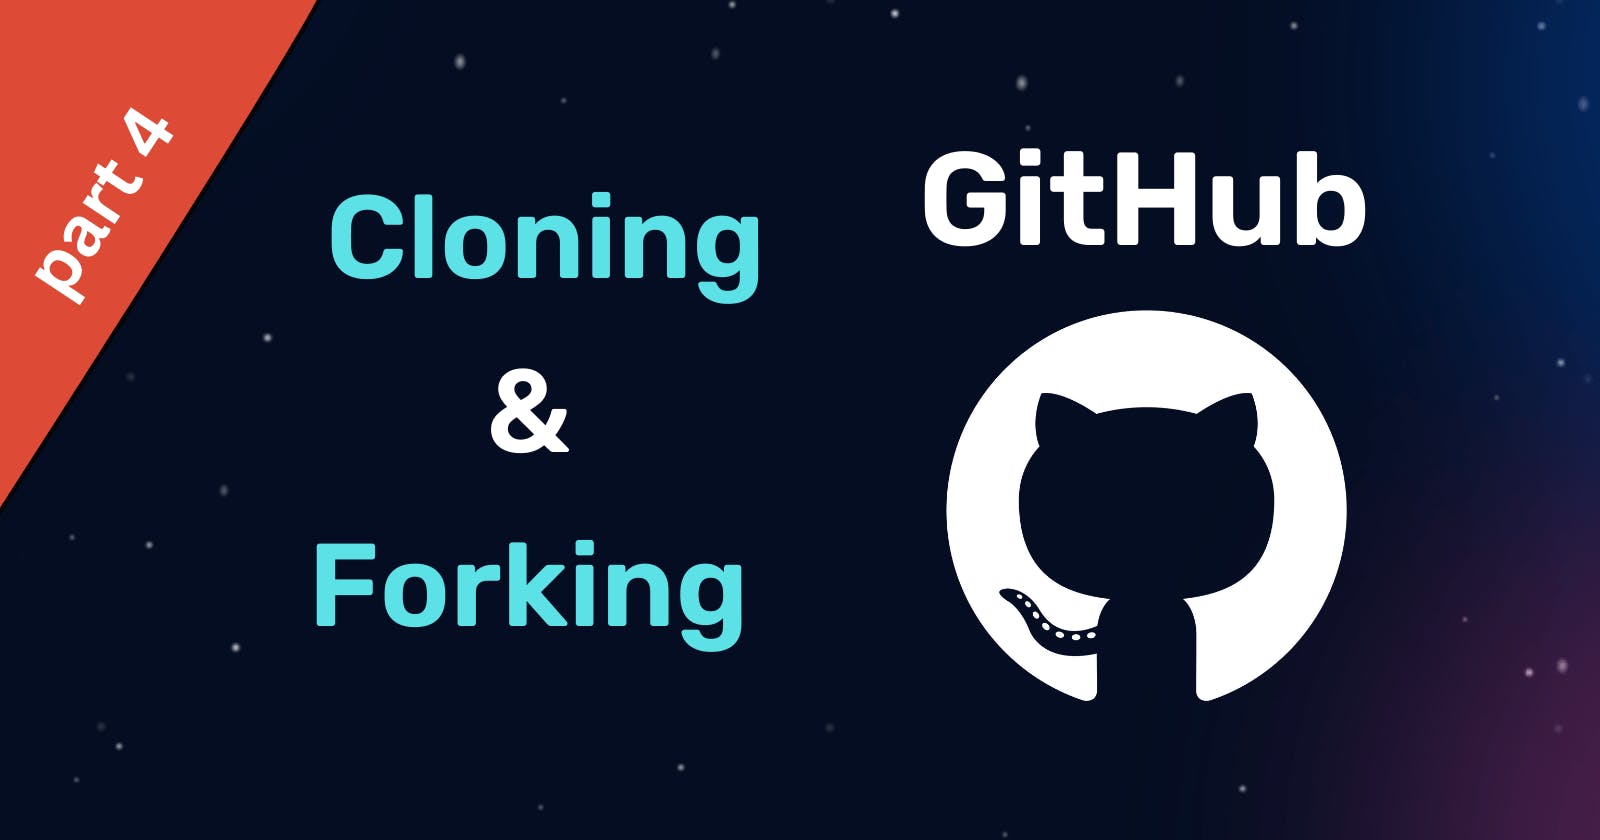 How to get familiar with Forking and Cloning GitHub repos?